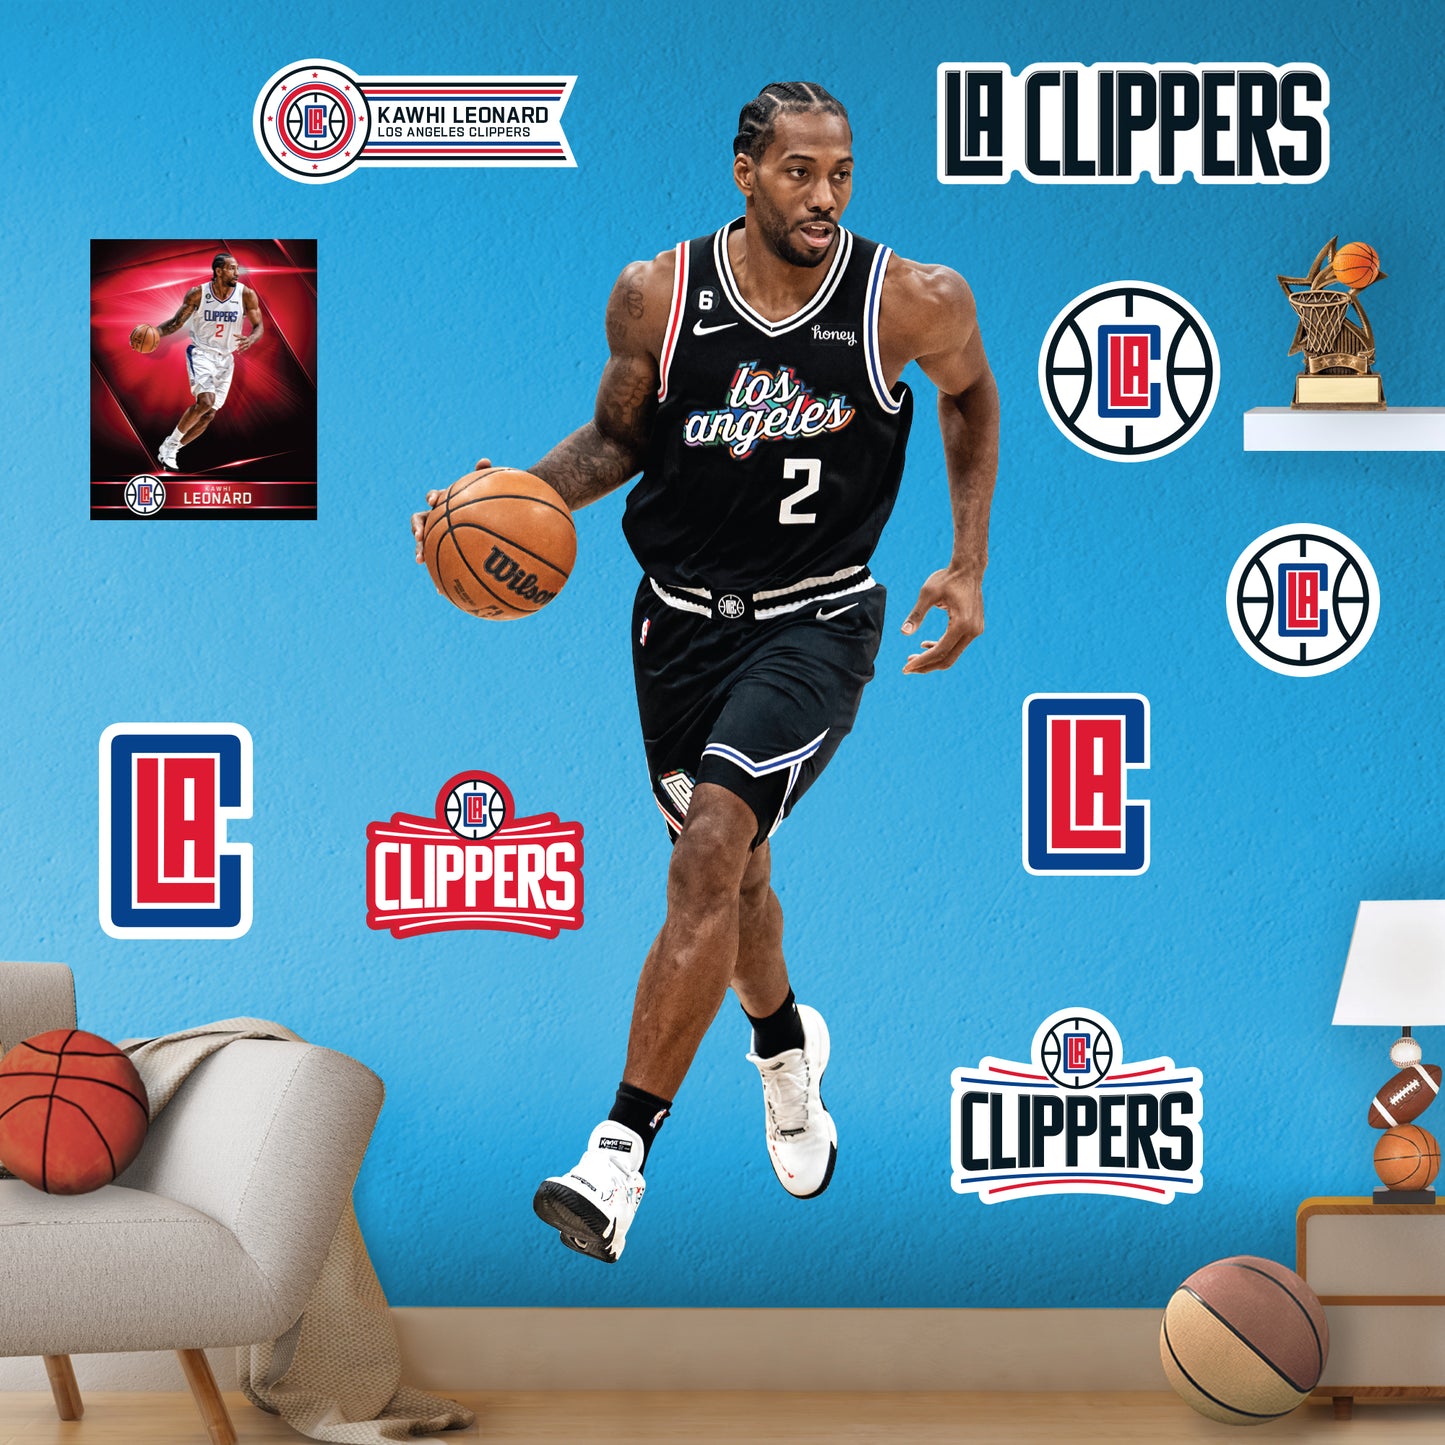 Los Angeles Clippers: Kawhi Leonard 2022 - Officially Licensed NBA